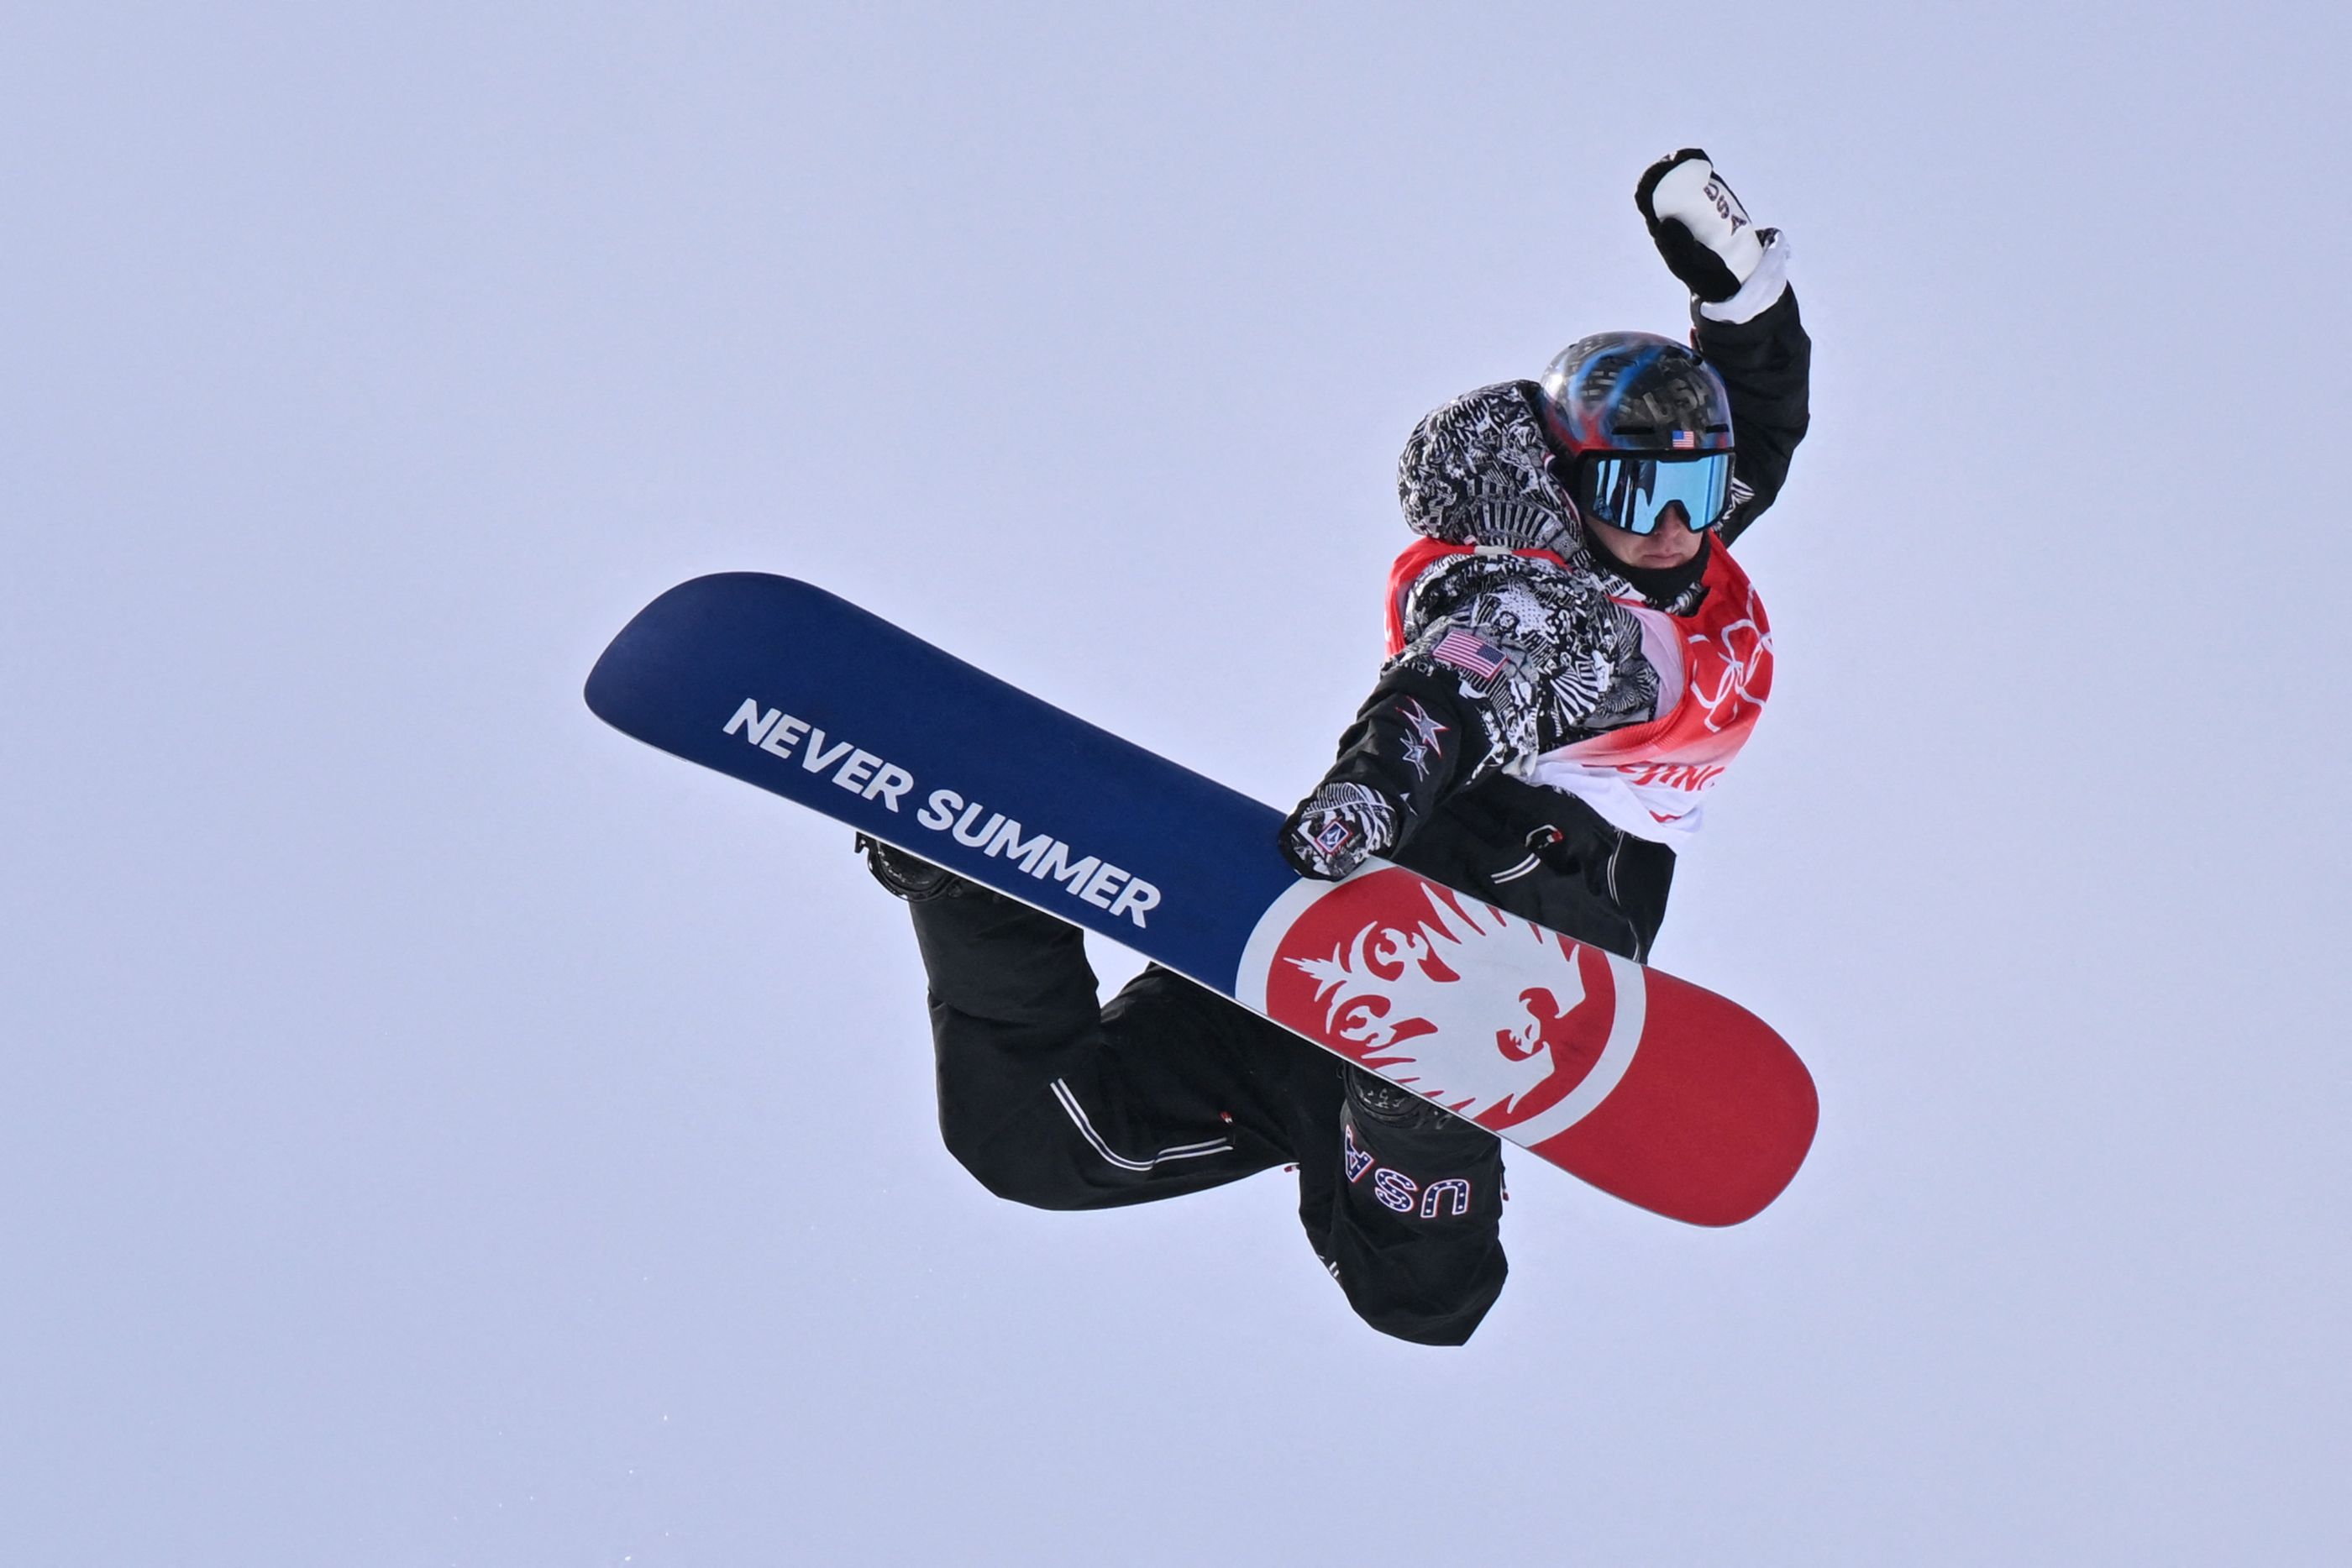 USA's Chris Corning competes in the snowboard men's slopestyle final run during the Beijing 2022 Winter Olympic Games at the Genting Snow Park H & S Stadium in Zhangjiakou on February 7.